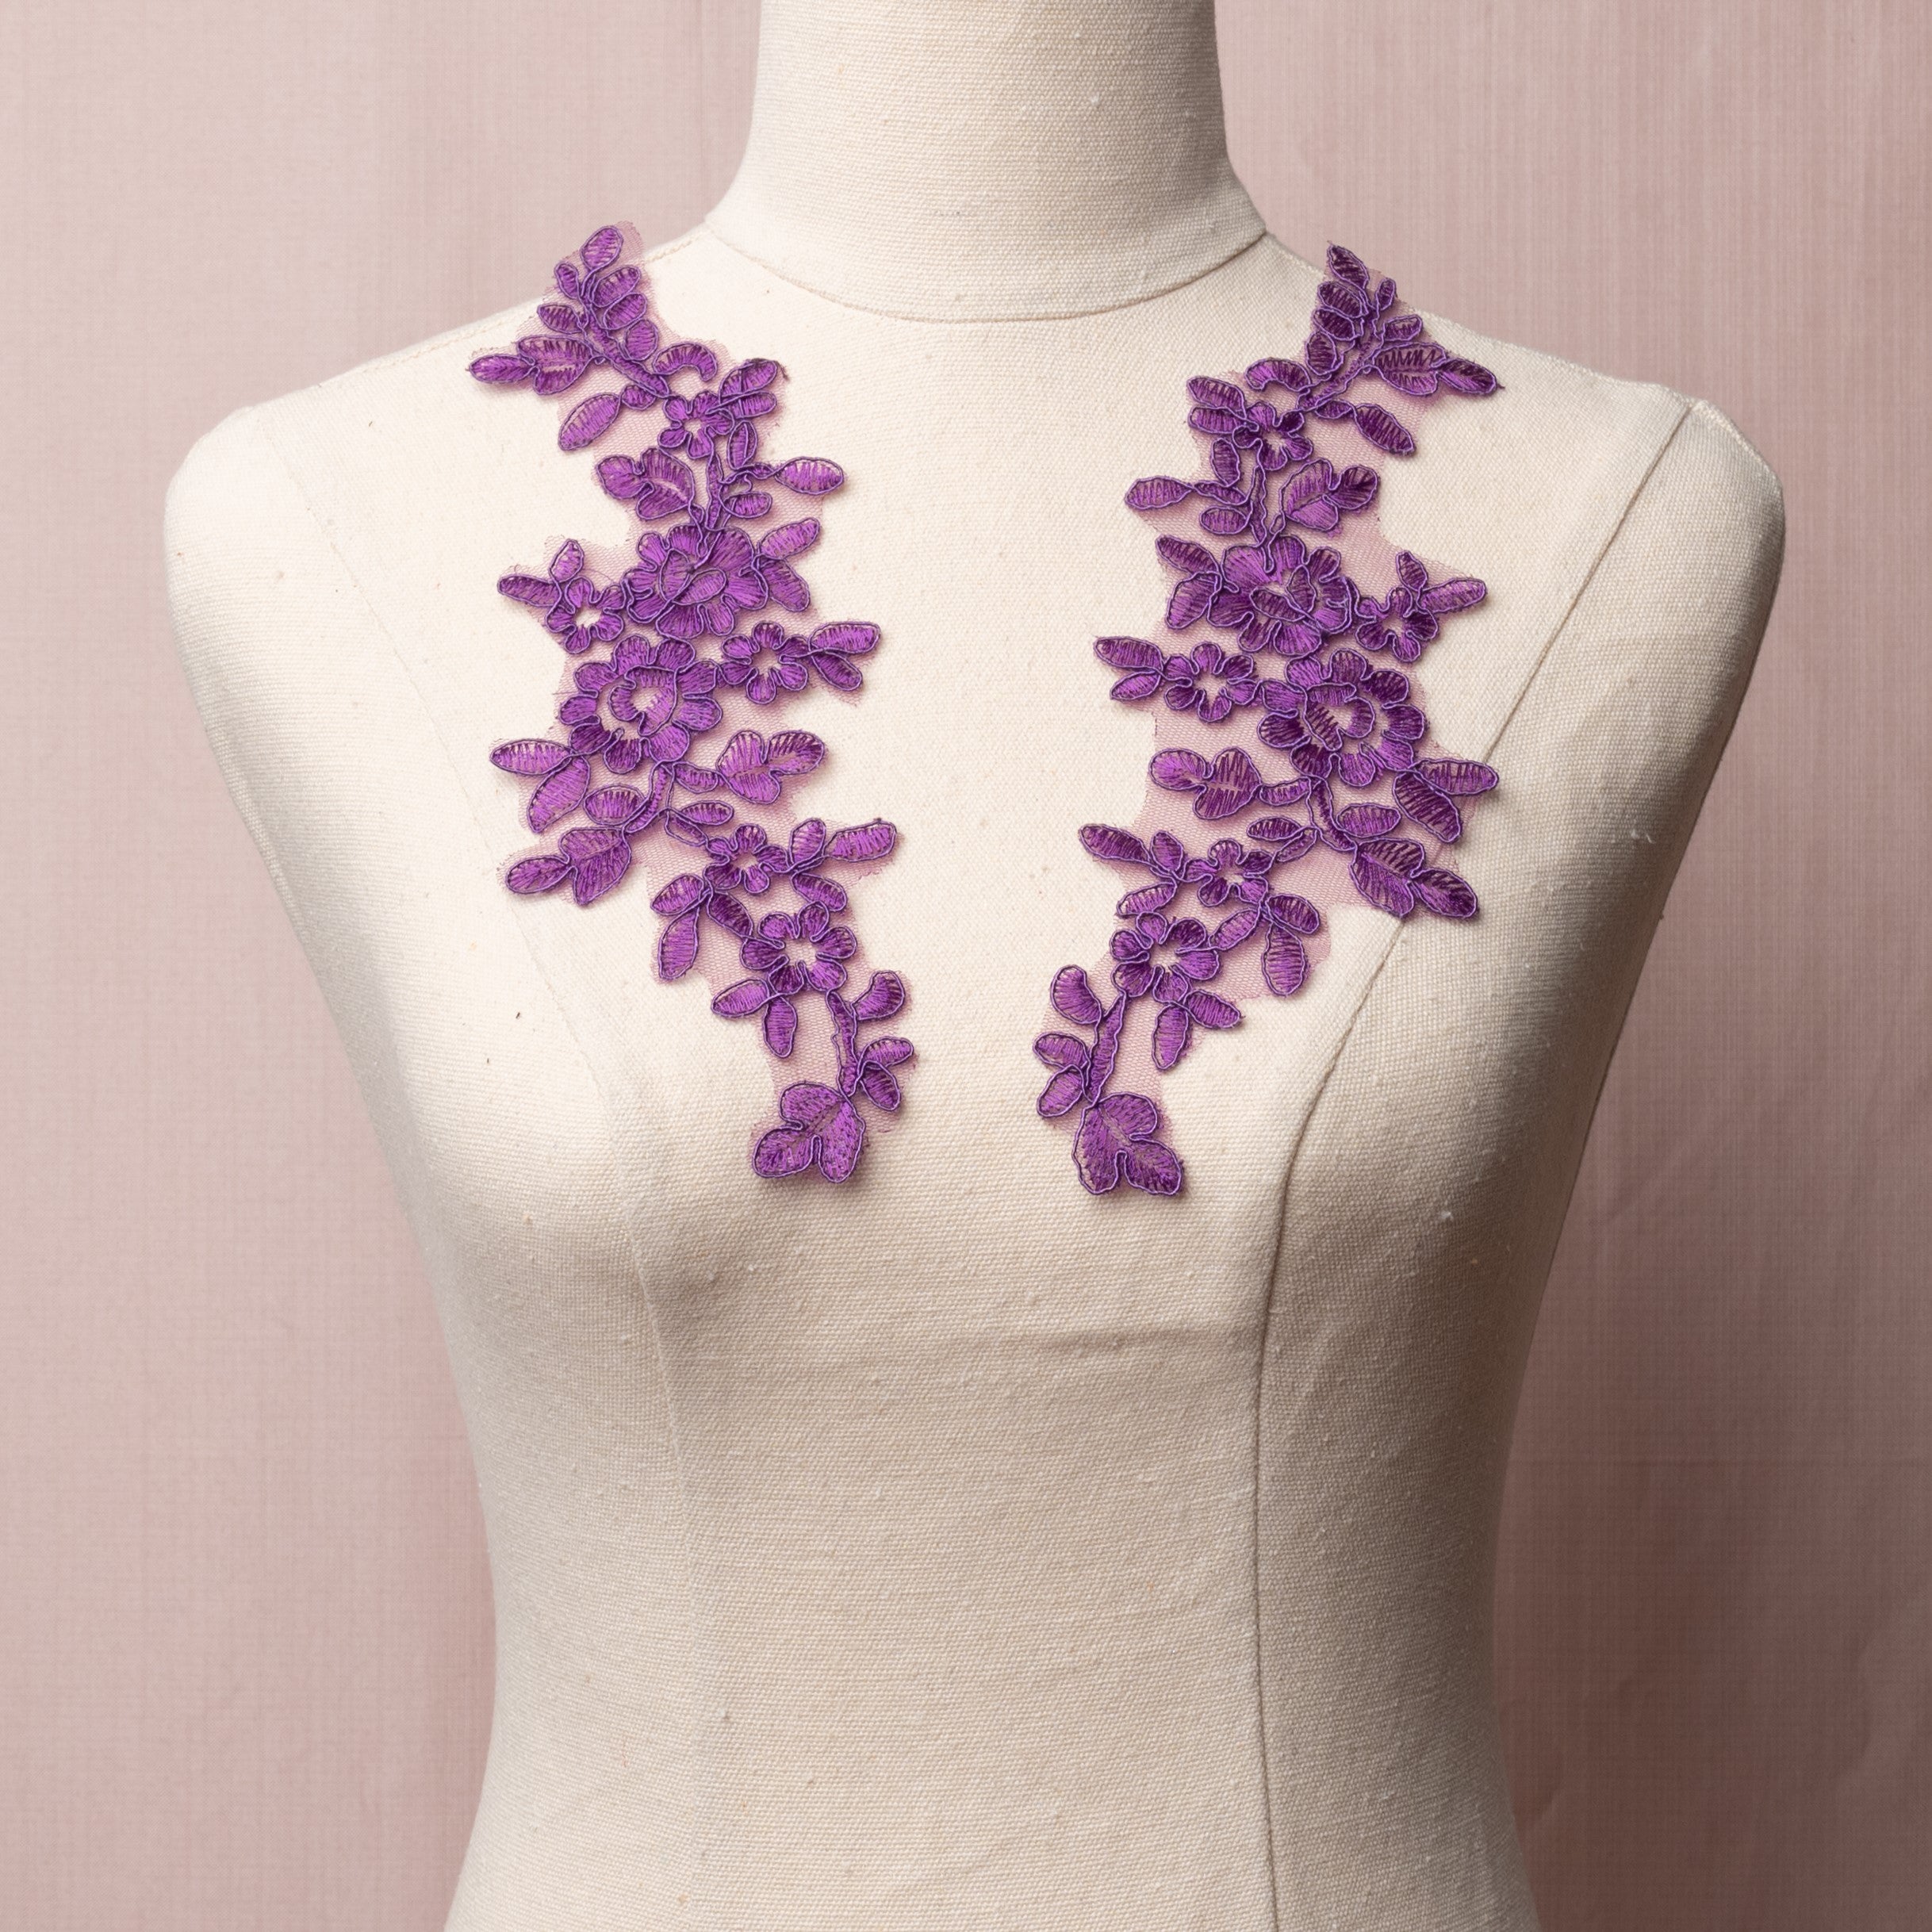 Mirrored purple corded appliques embroidered onto a fine net backing.  The appliques are displayed on a mannequin.